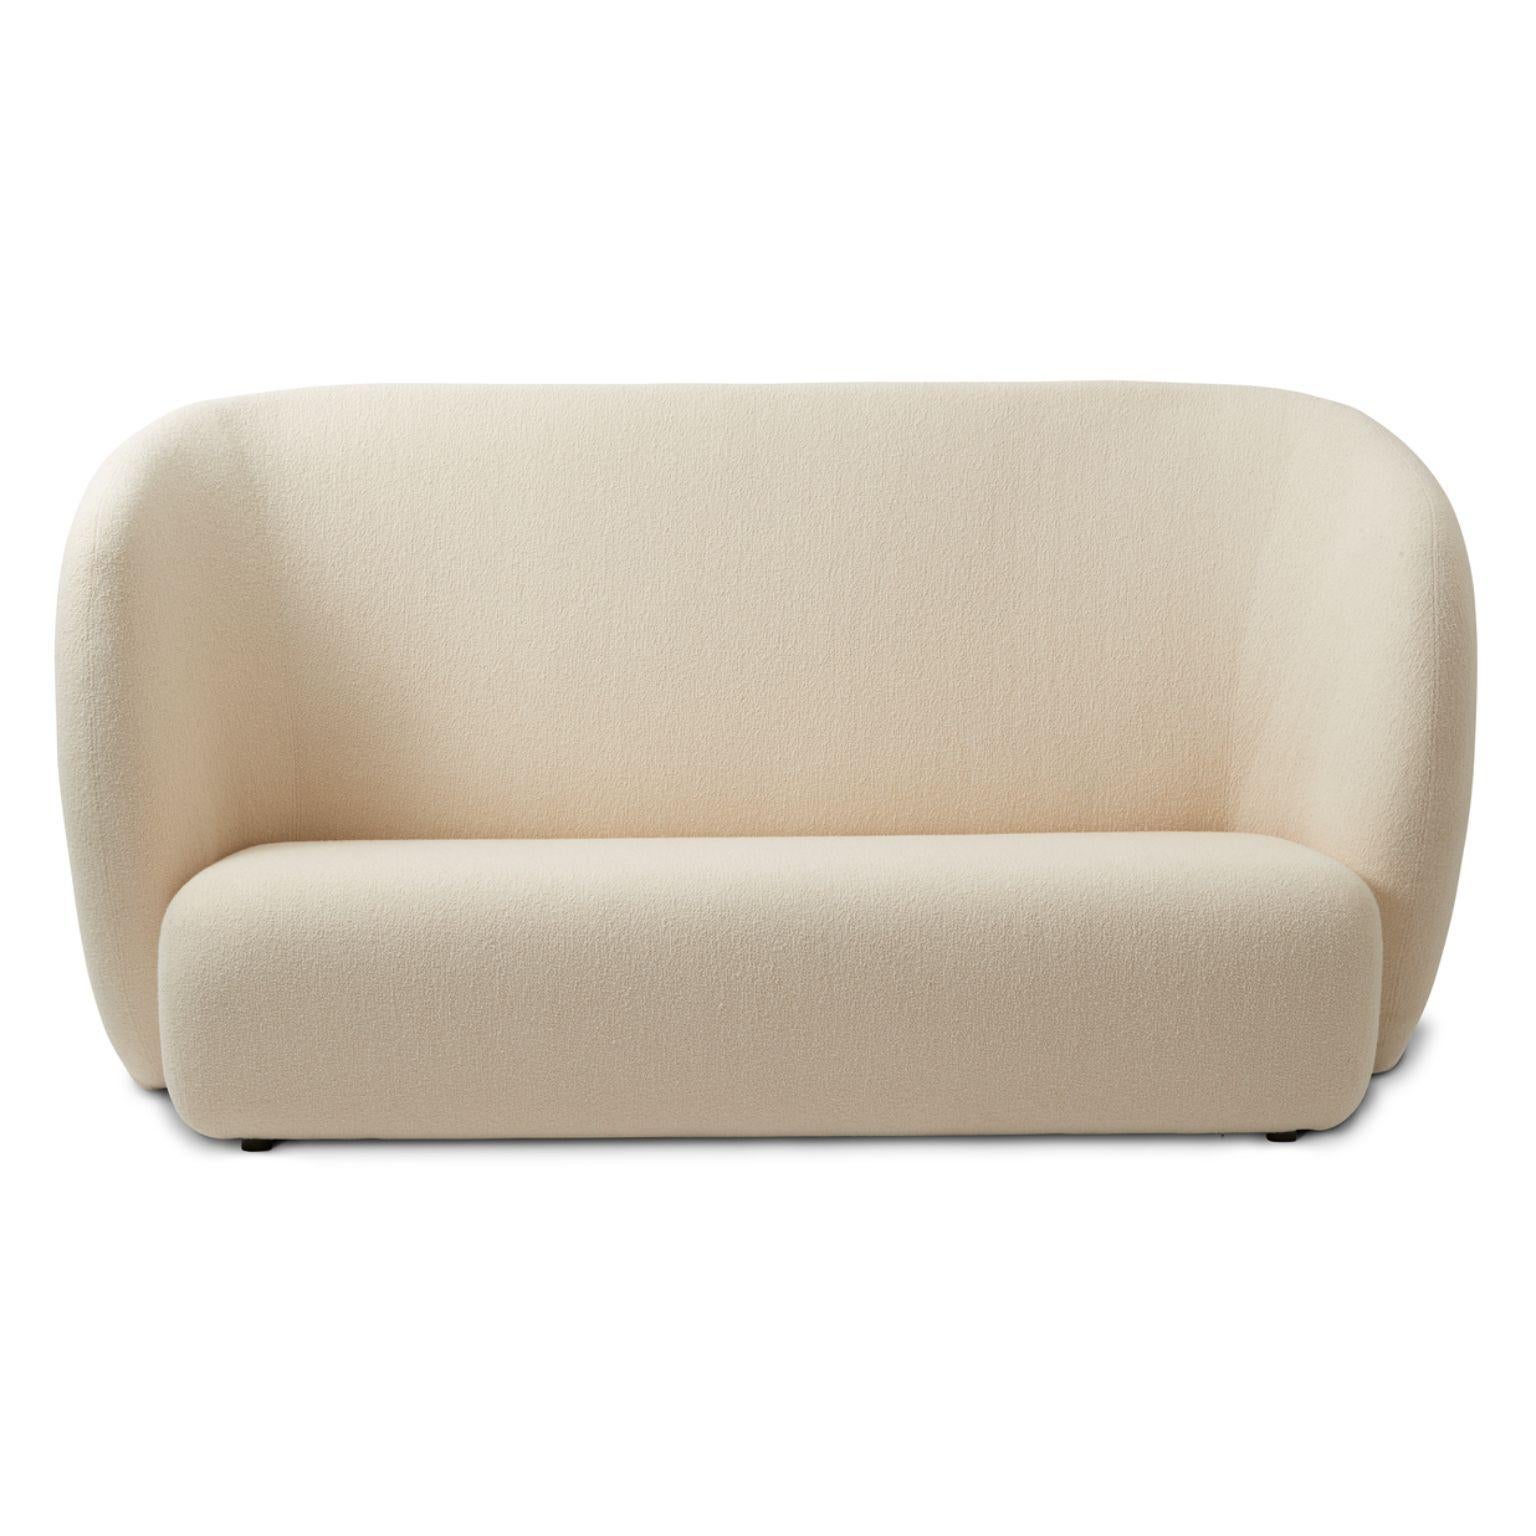 Haven 3 seater cream by Warm Nordic
Dimensions: D220 x W84 x H 110/40 cm
Material: Textile upholstery, Foam, Spring system, Wood
Weight: 84 kg
Also available in different colours and finishes. 

Haven is a contemporary sofa with a simple, soft